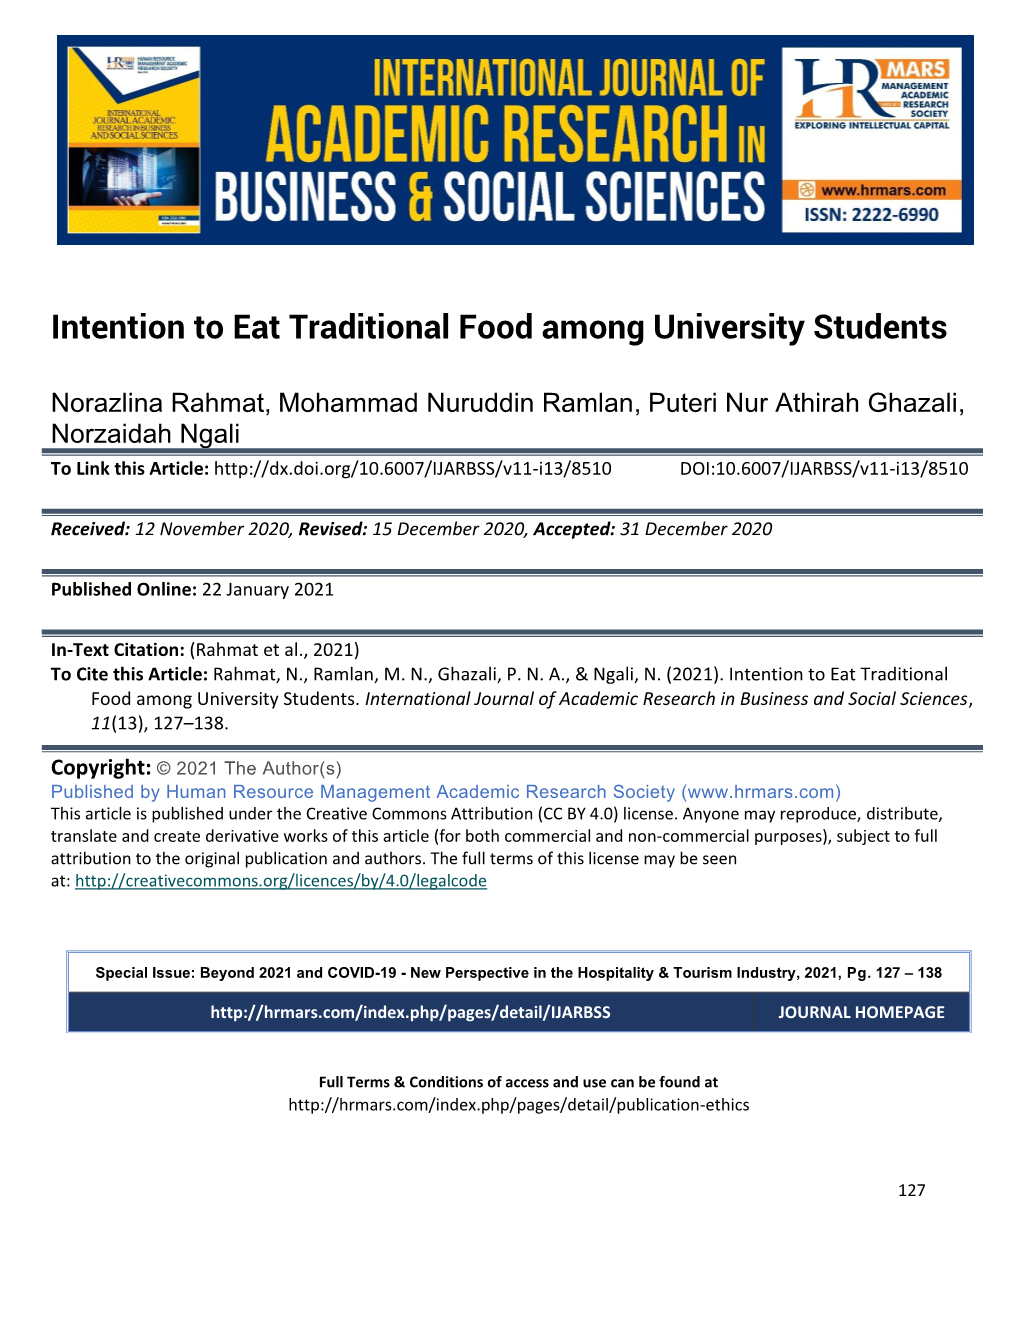 Intention to Eat Traditional Food Among University Students